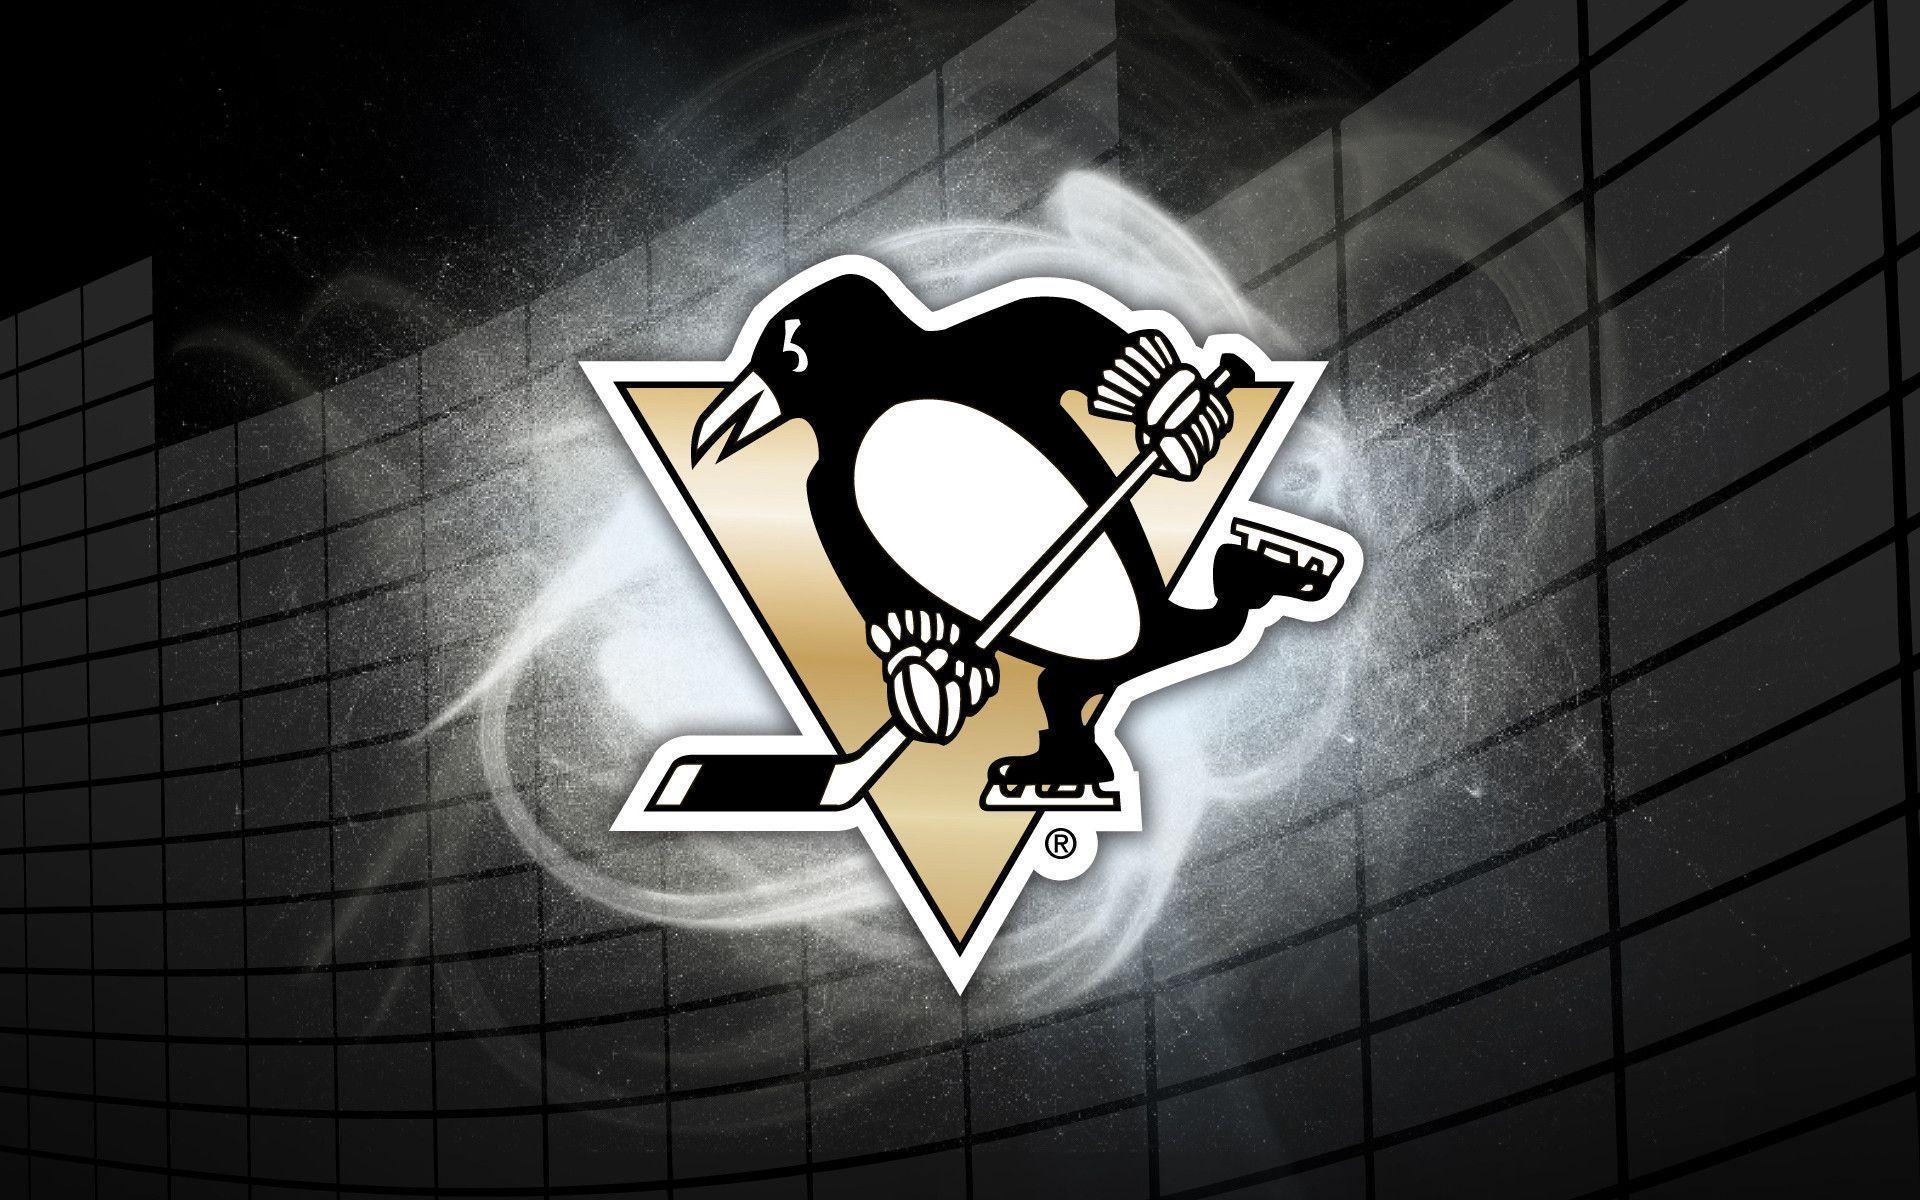 pittsburgh penguins iPhone Wallpapers Free Download